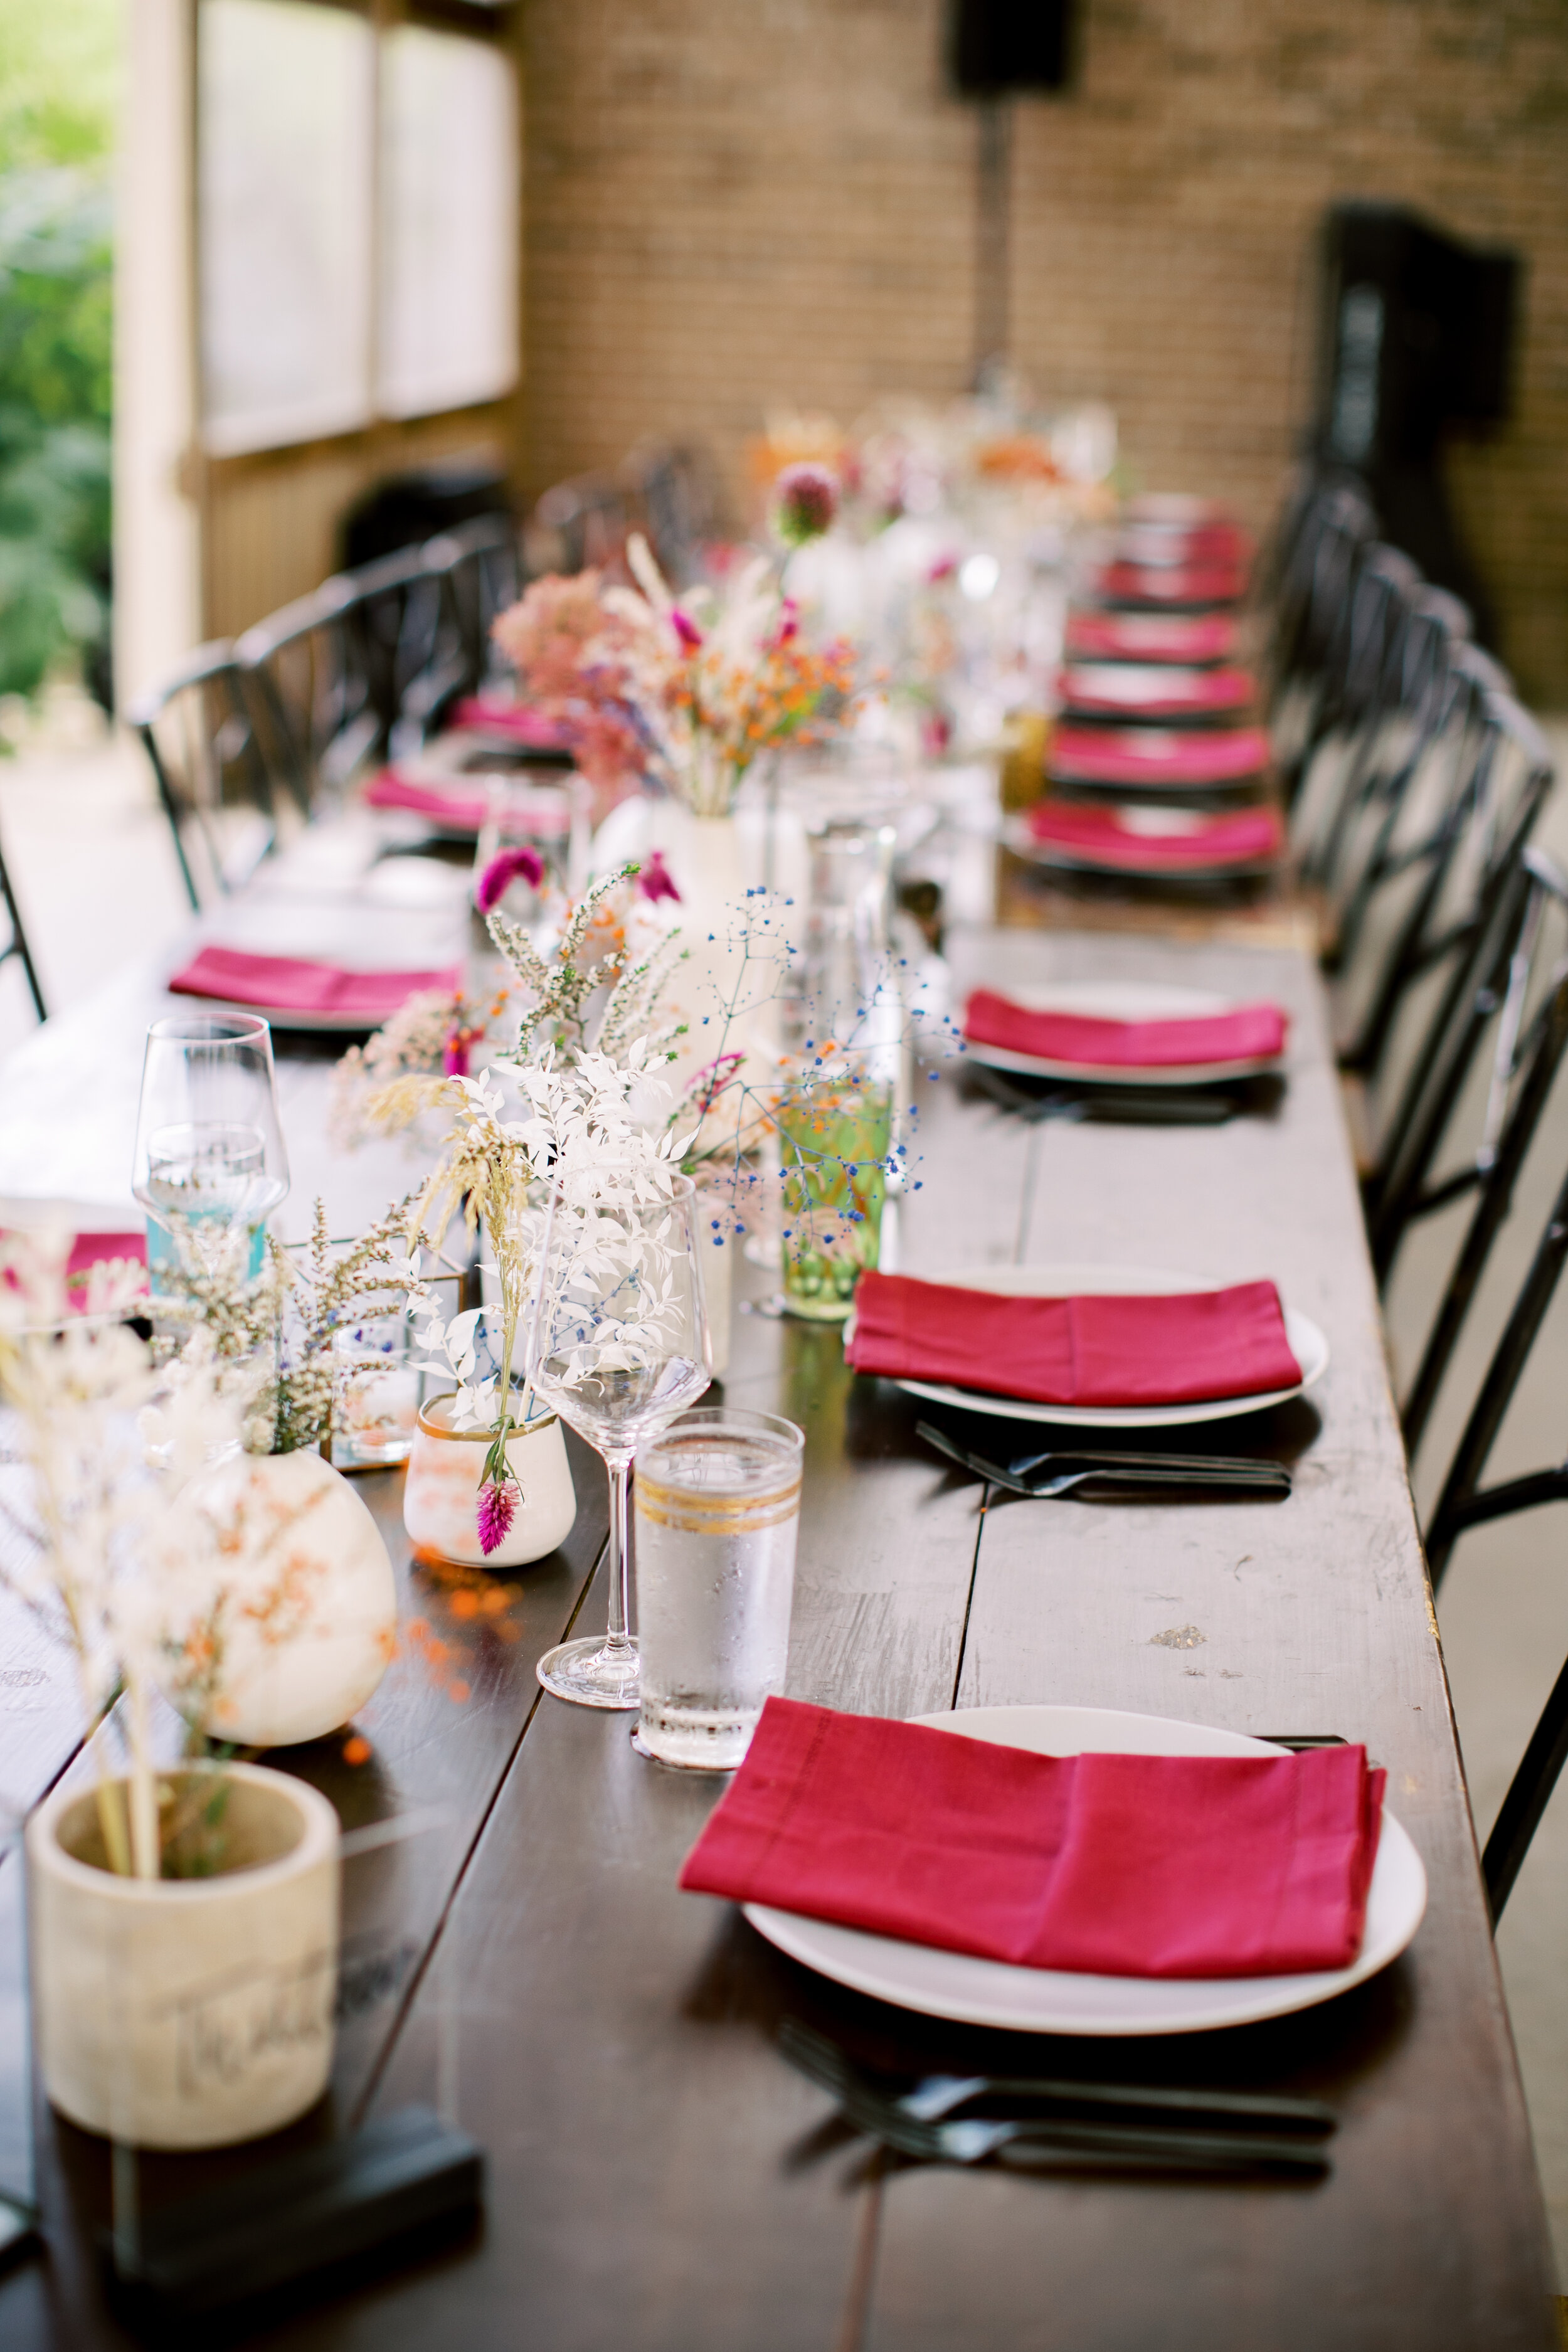 Earthy Austin wedding with bright colors and stationery by poeme